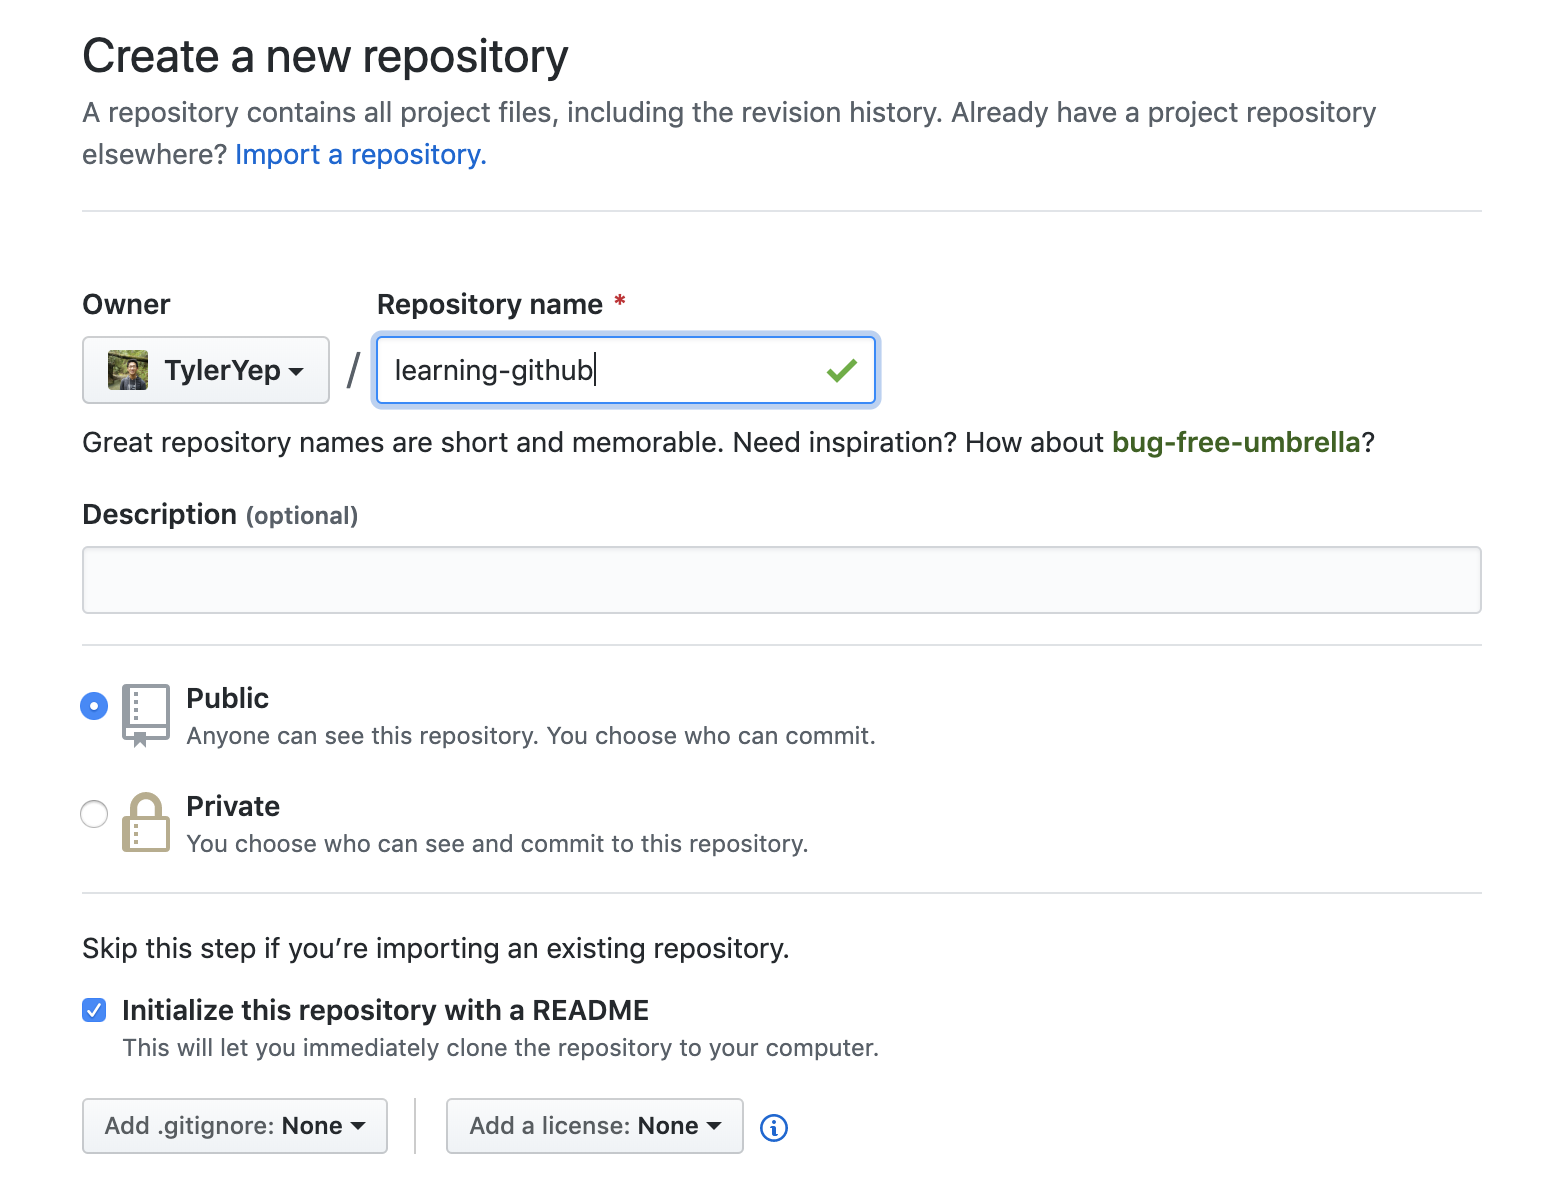 Creating the repository